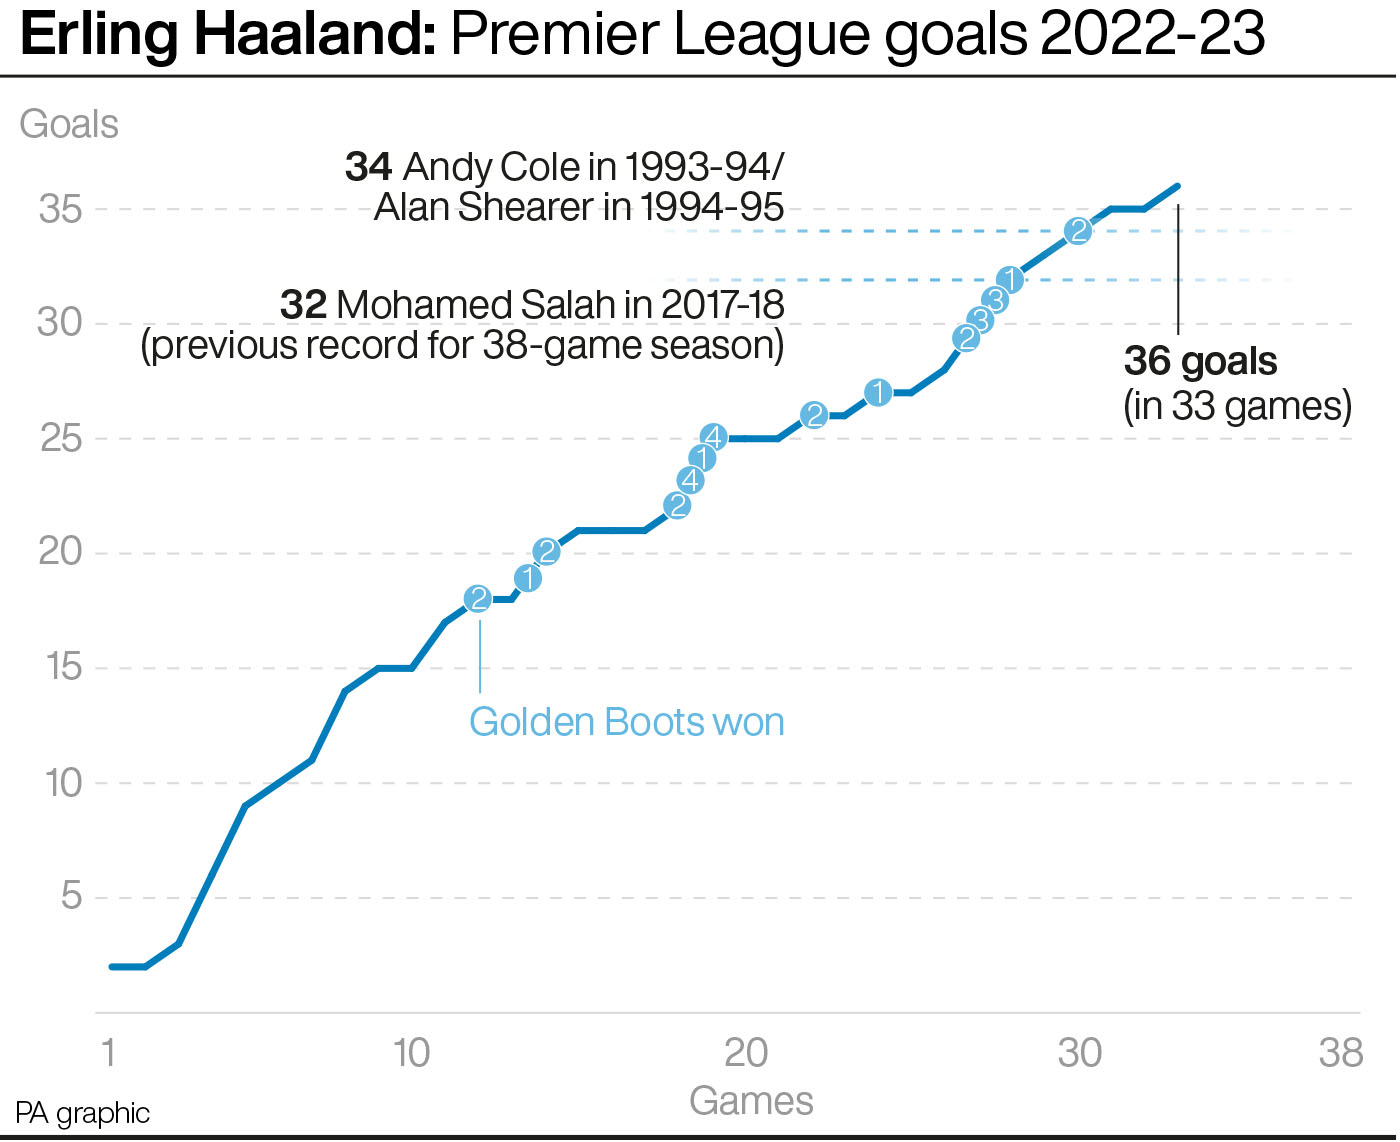 Erling Haaland: Premier League goals 2022-23 and comparison to previous Golden Boot winners